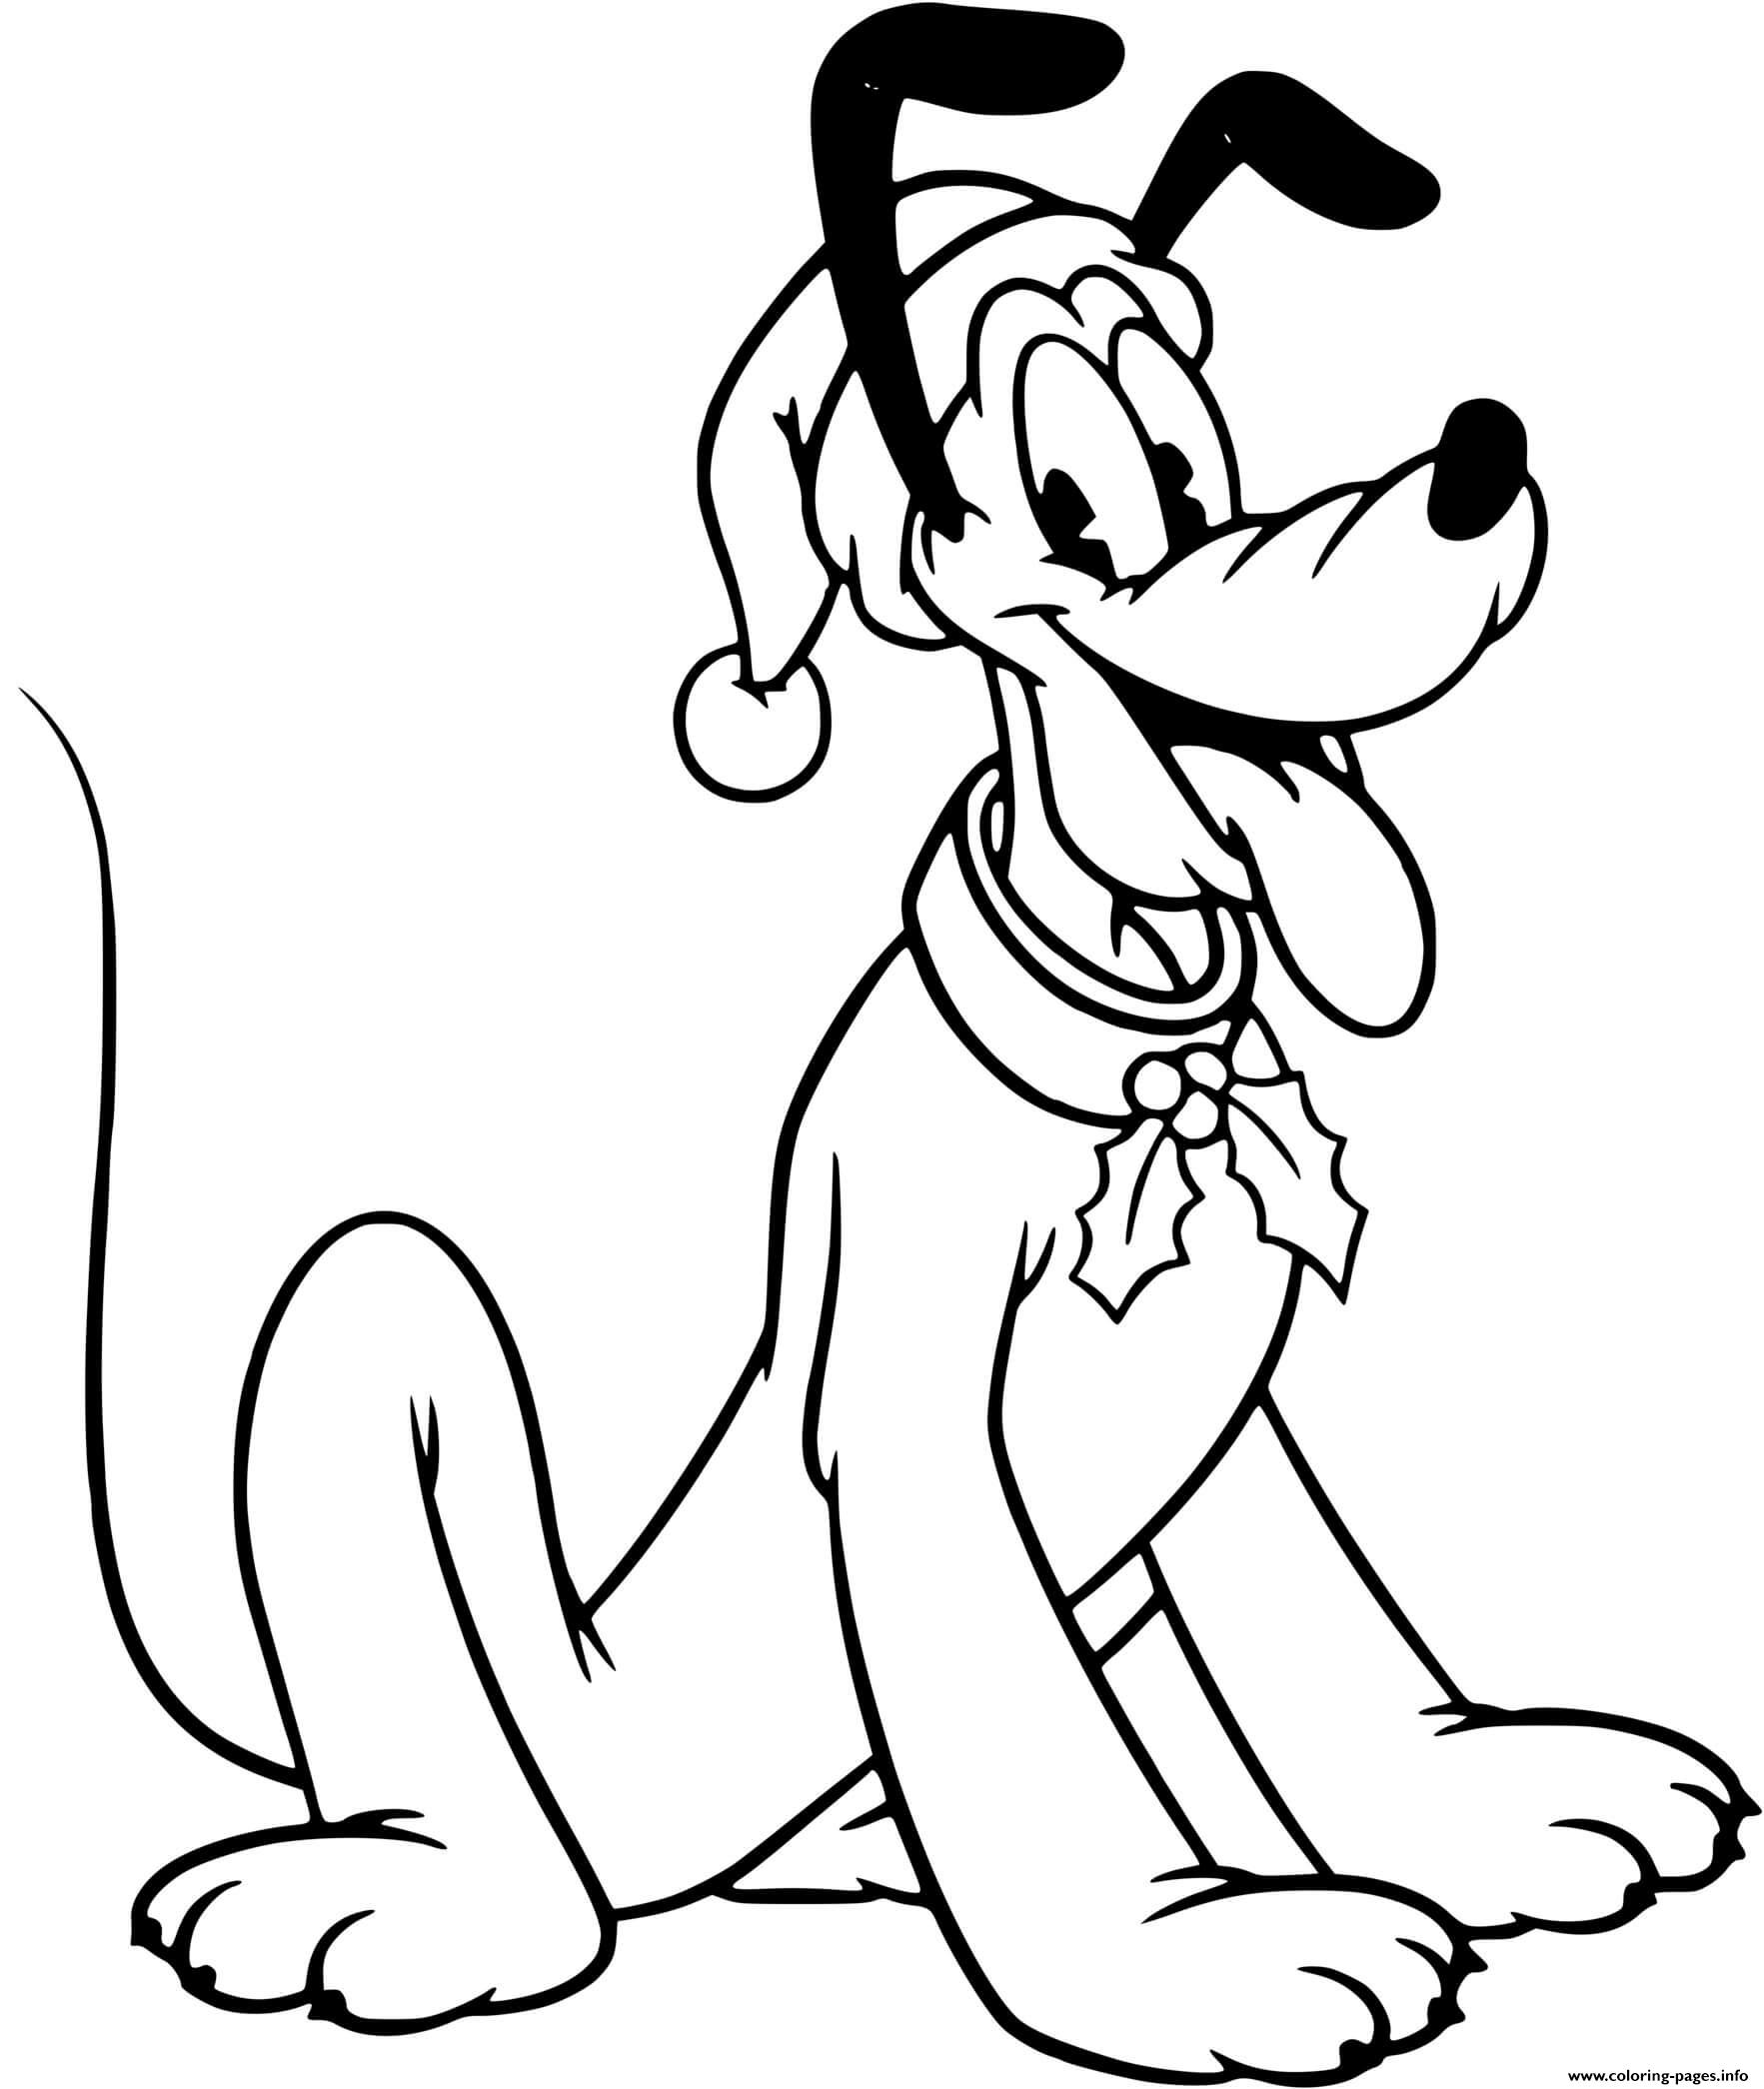 Pluto Wearing Hat And Festive Collar coloring